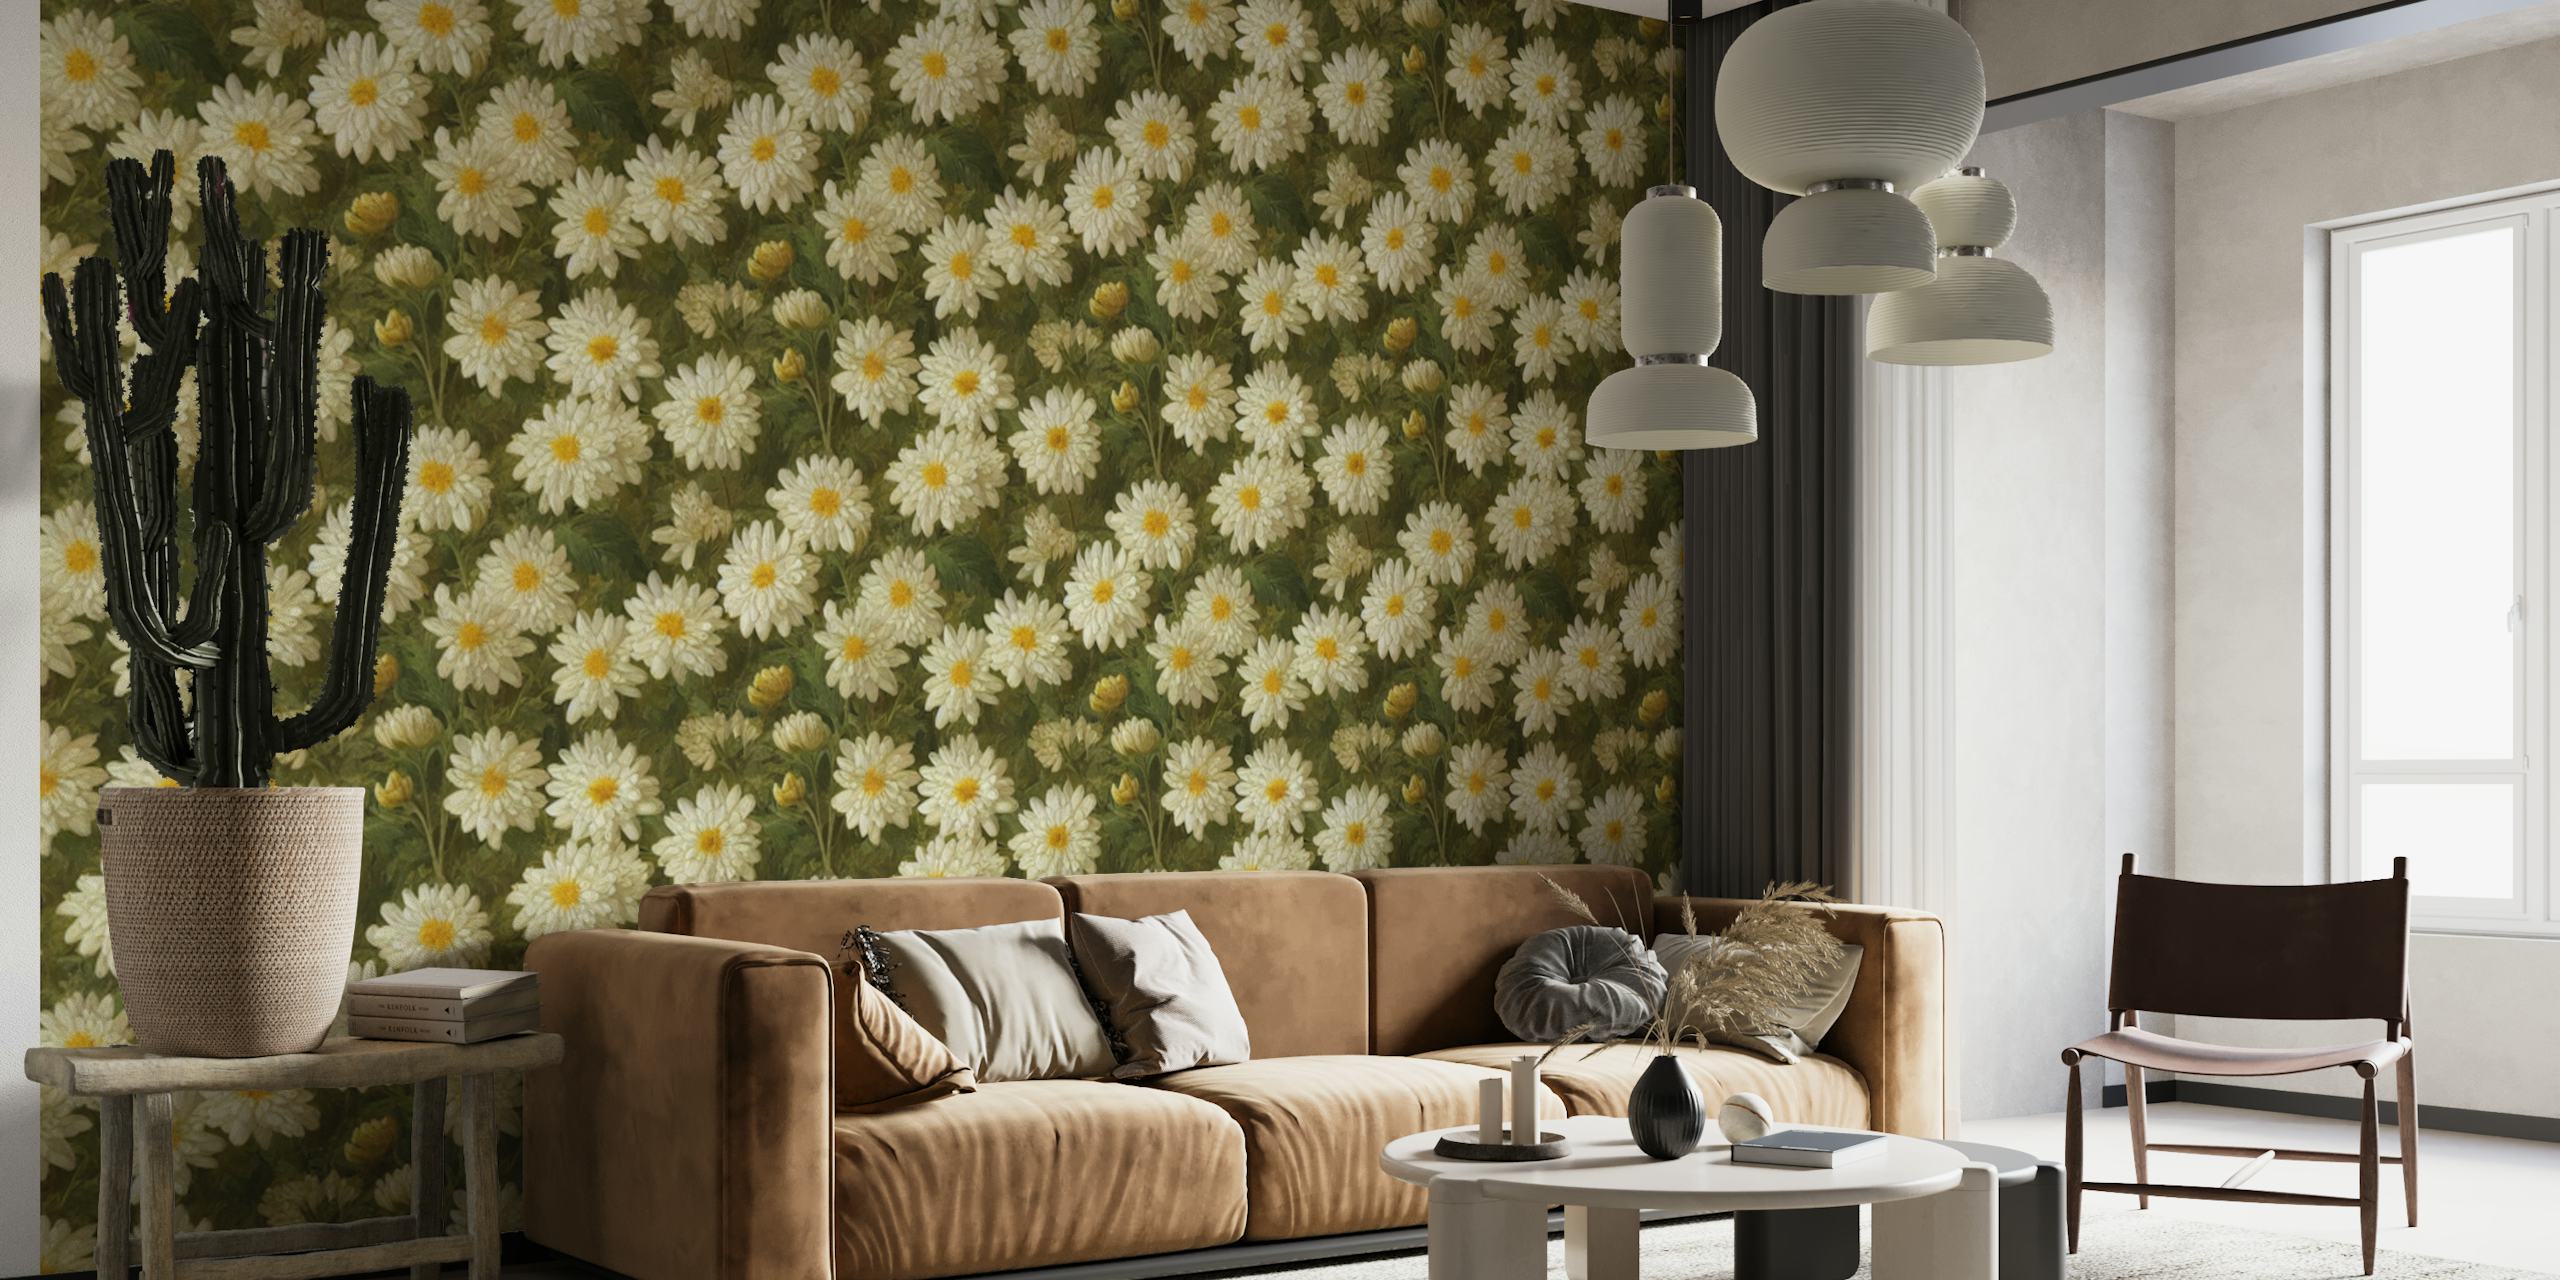 Soft Buttons wall mural with flower-like designs on a warm background